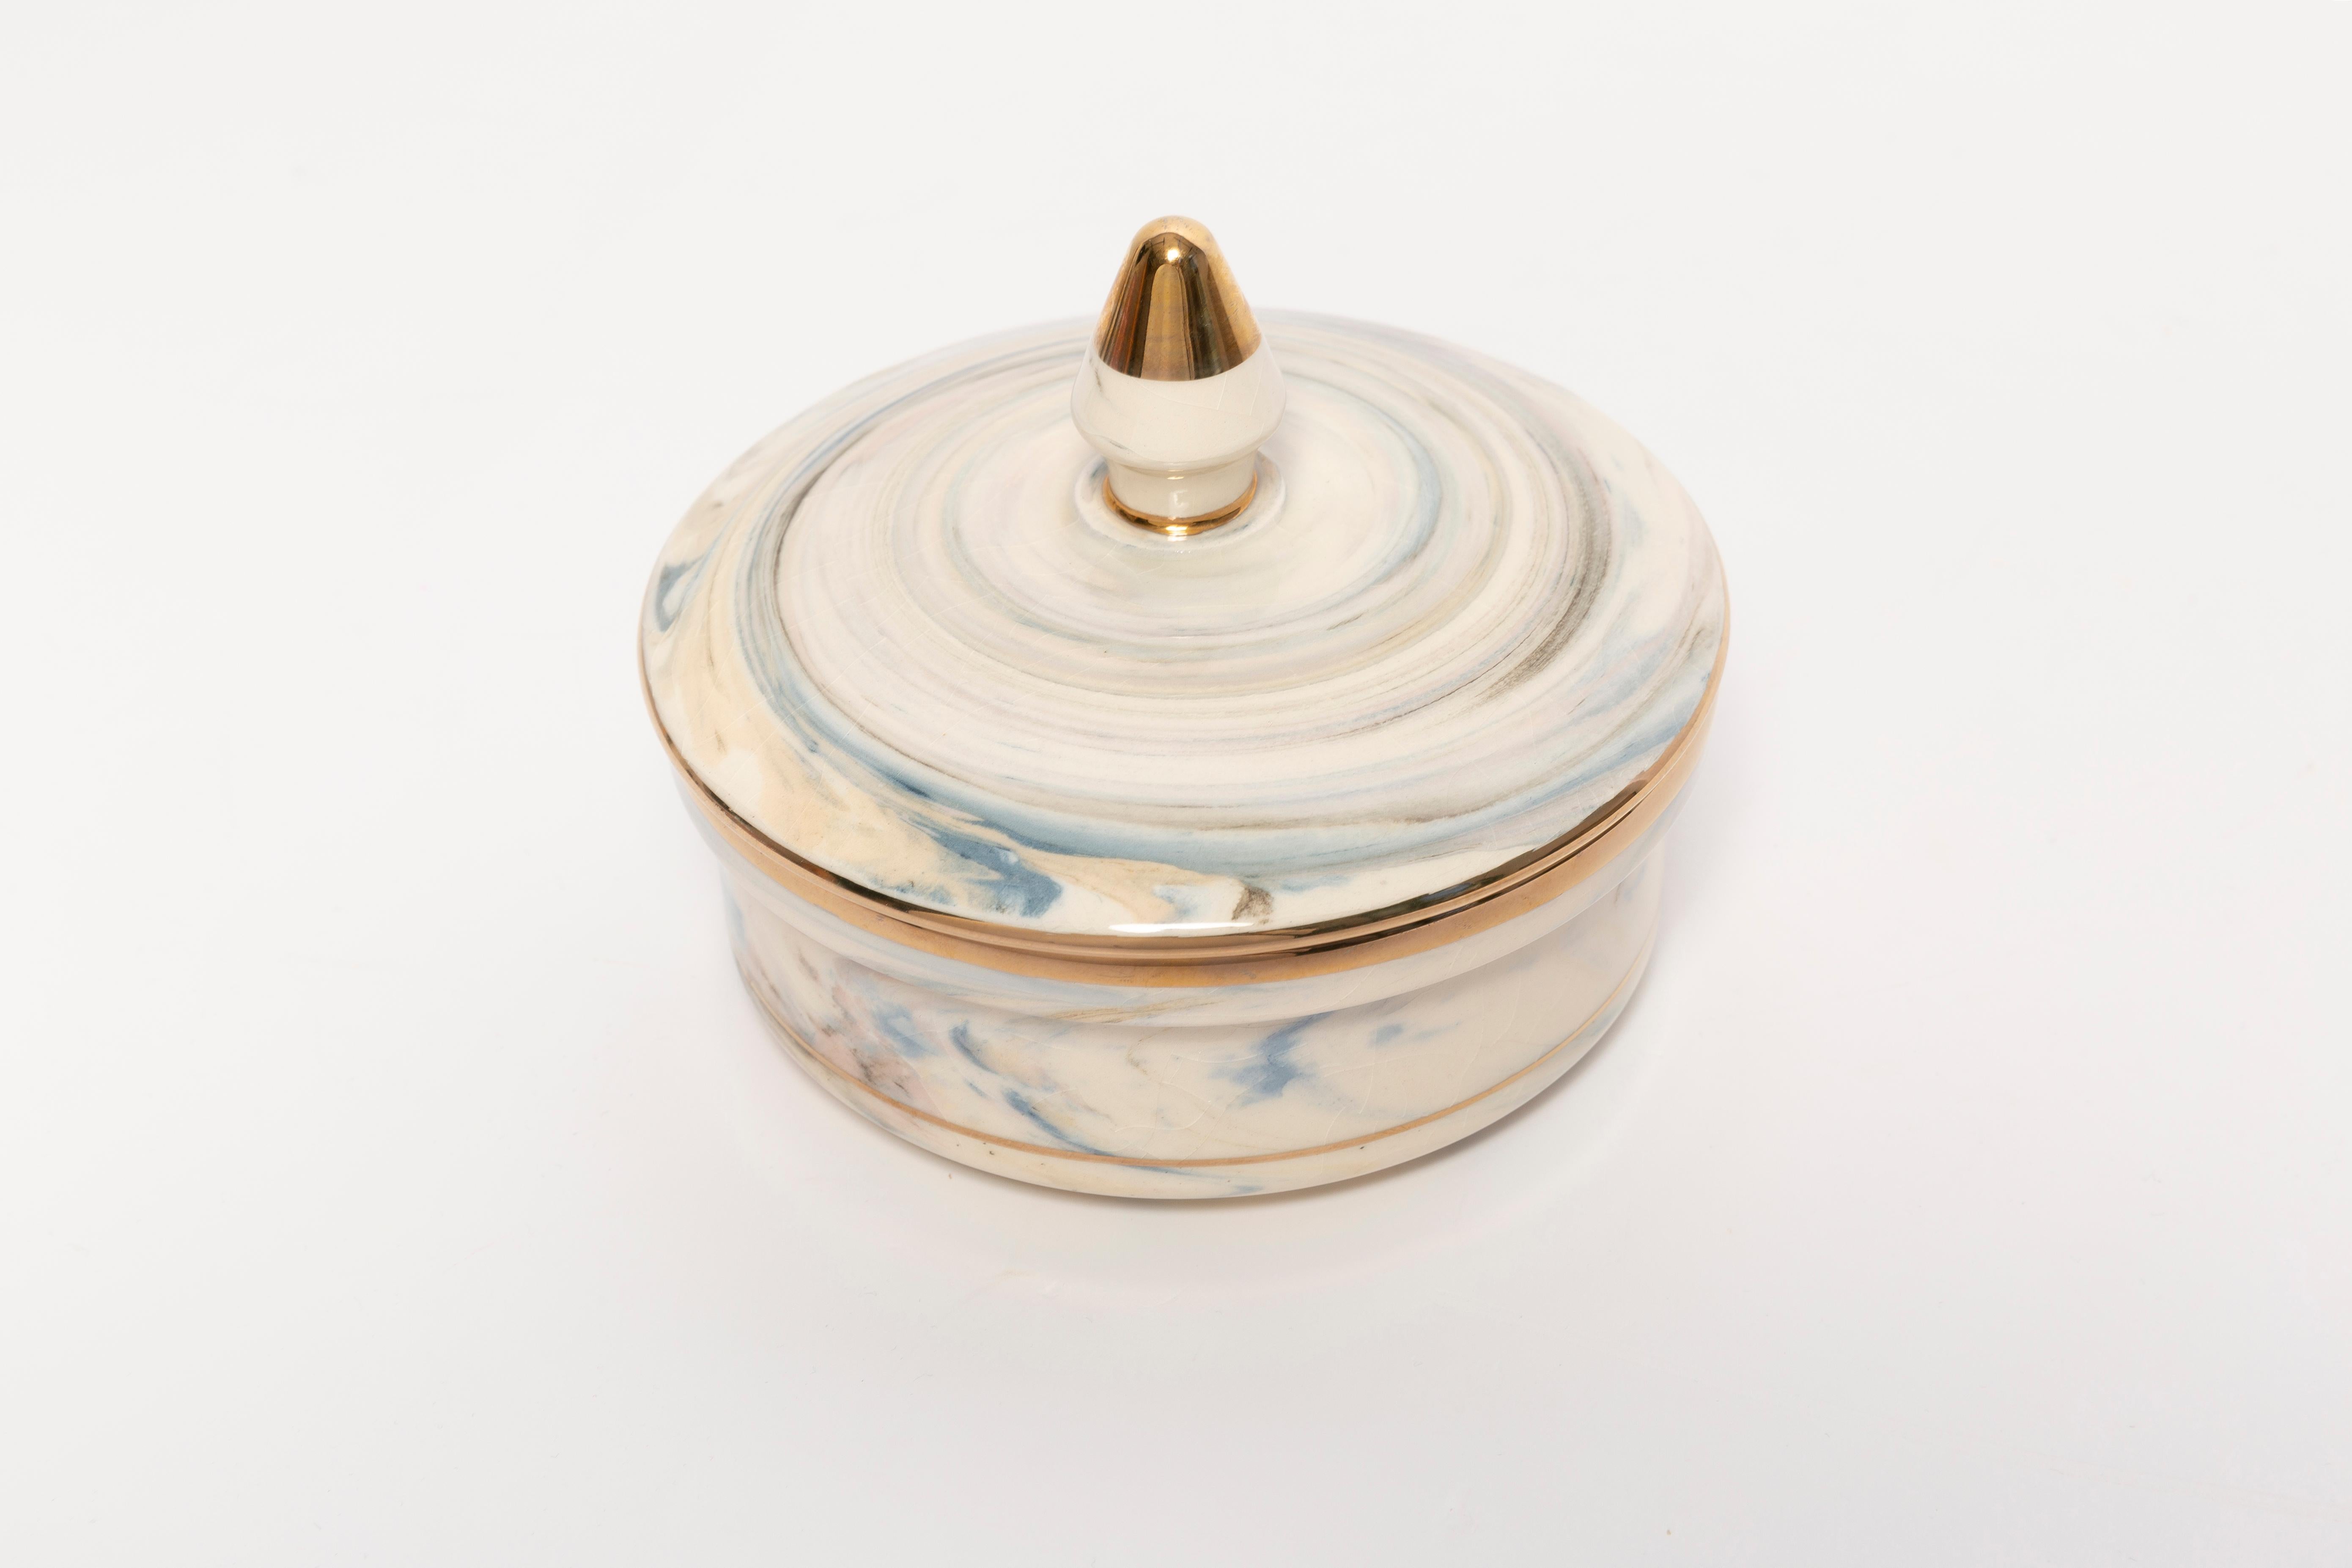 Small Ceramic Vase for Candy or Jewelry Box, 20th Century, Europe, 1960s For Sale 4